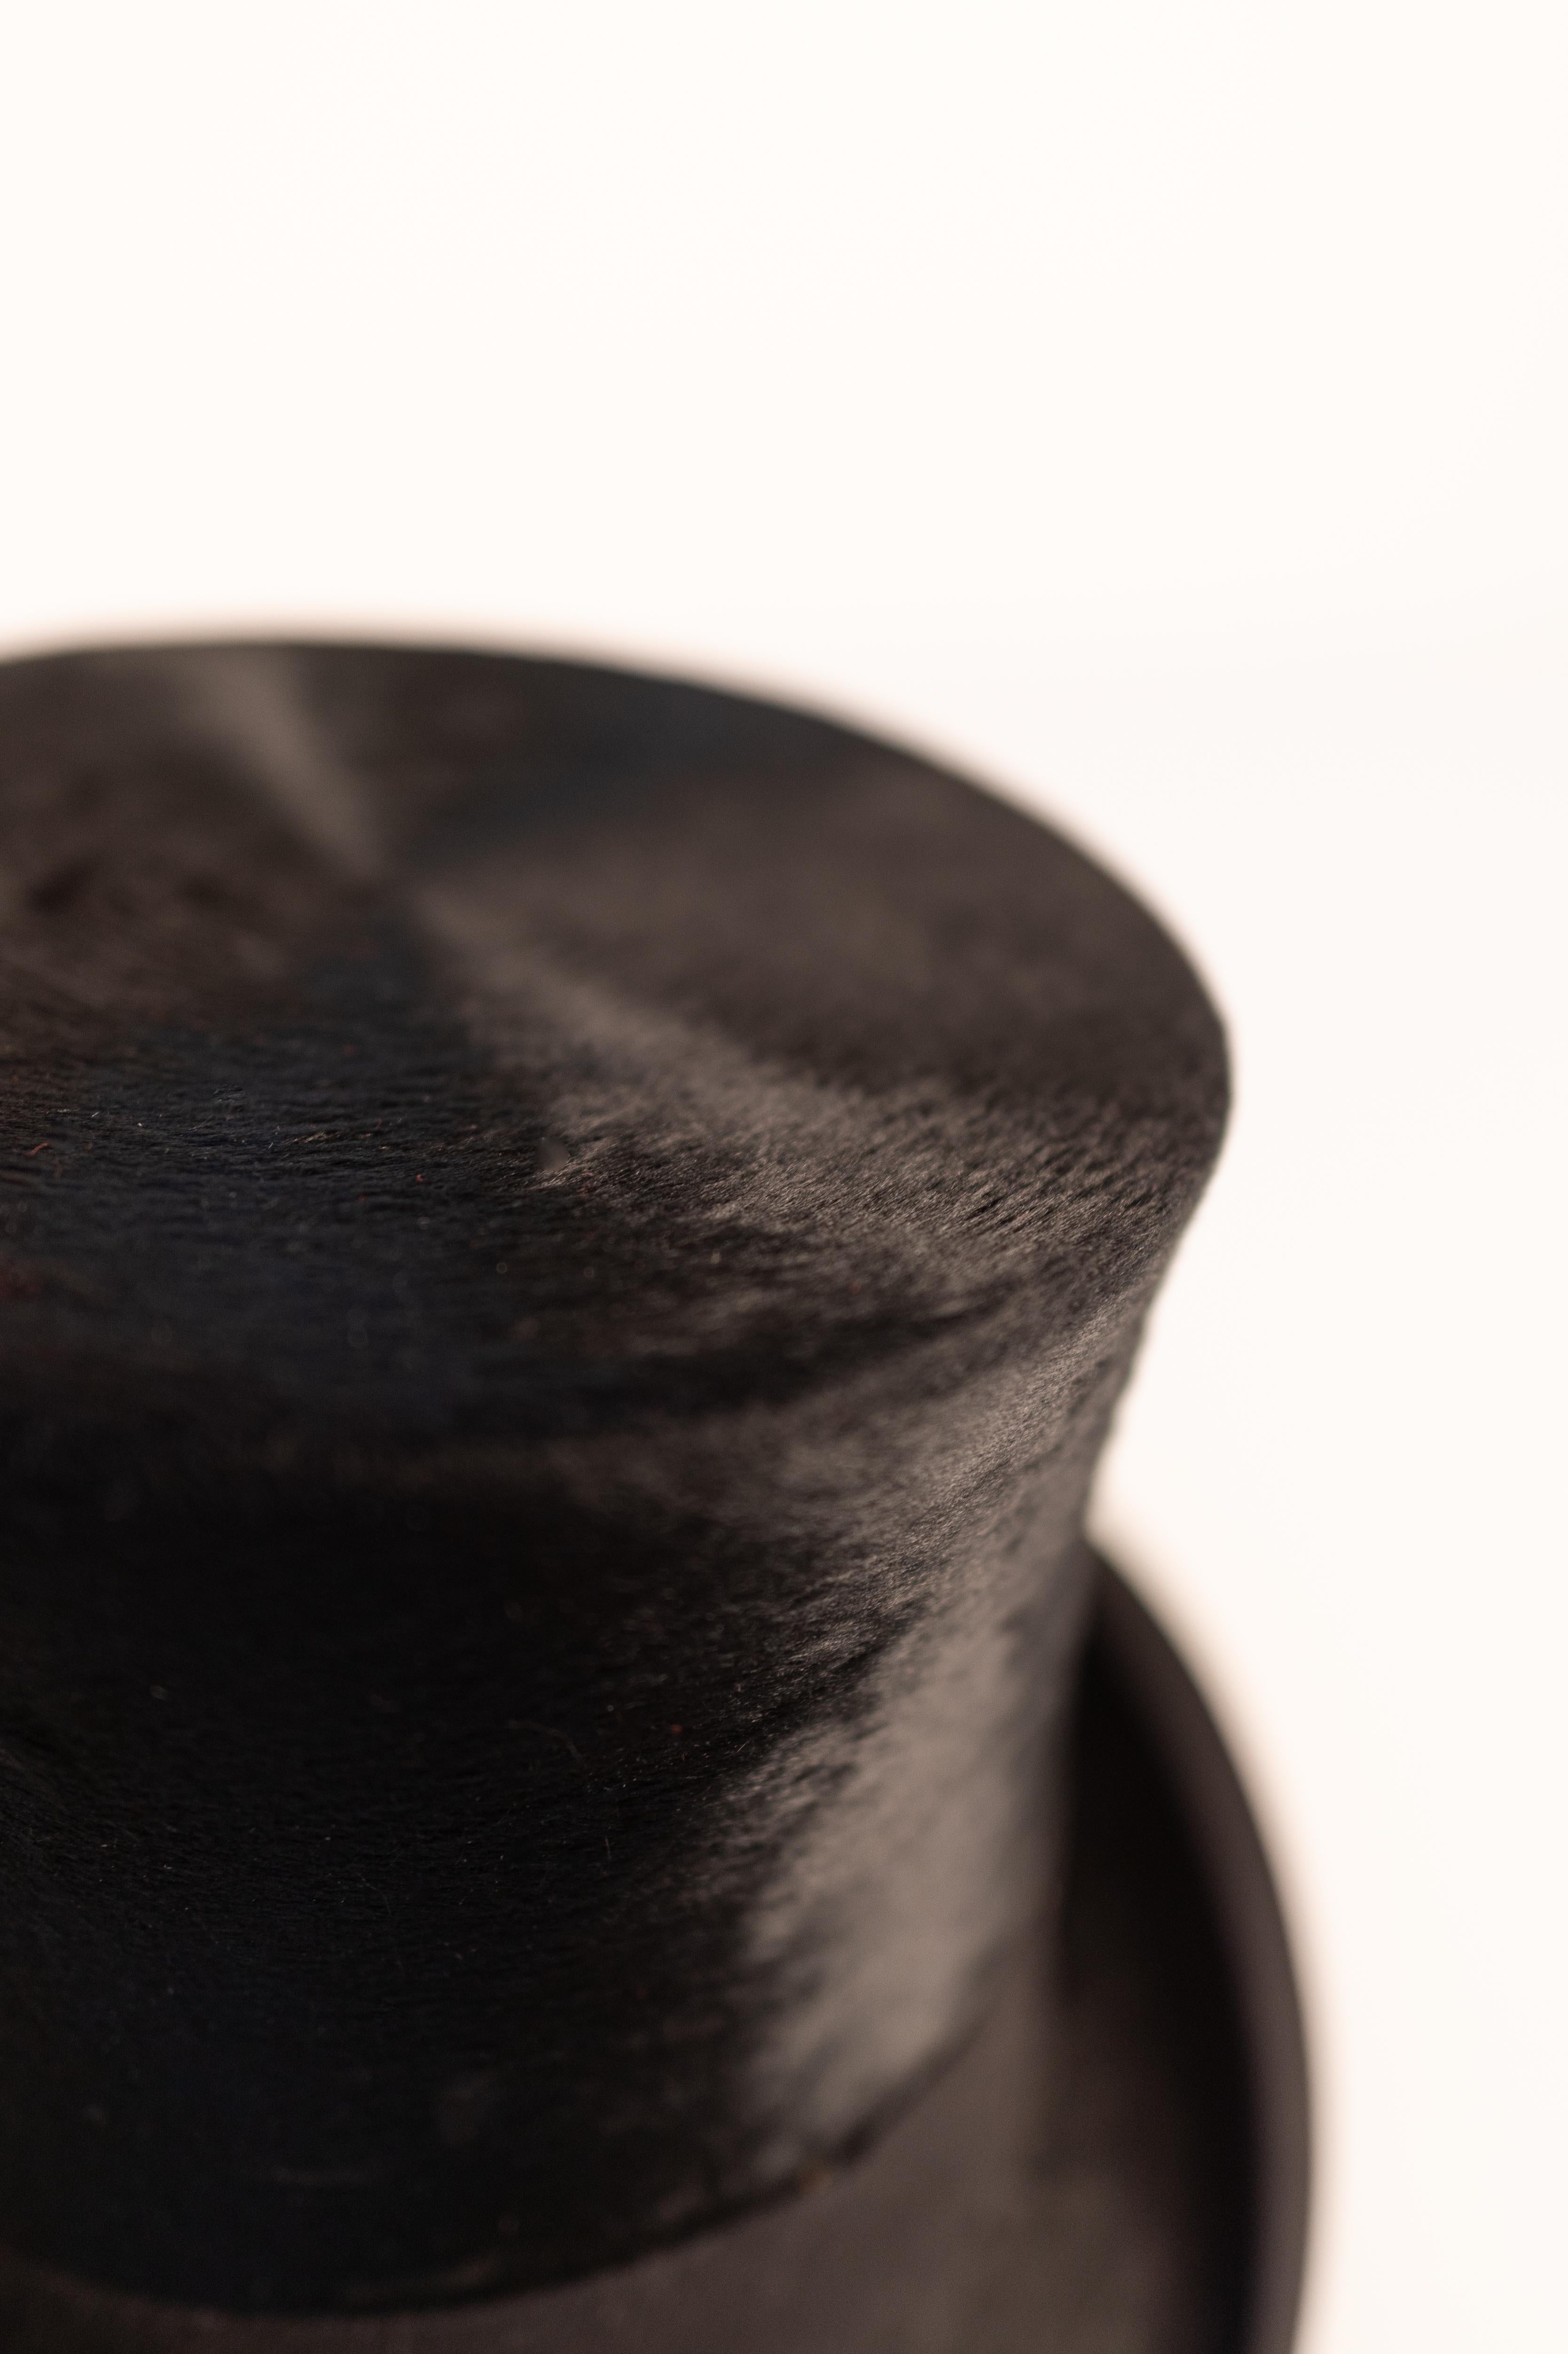 French Moleskin top hat, with leather hatbox (late 19th - early 20th century) For Sale